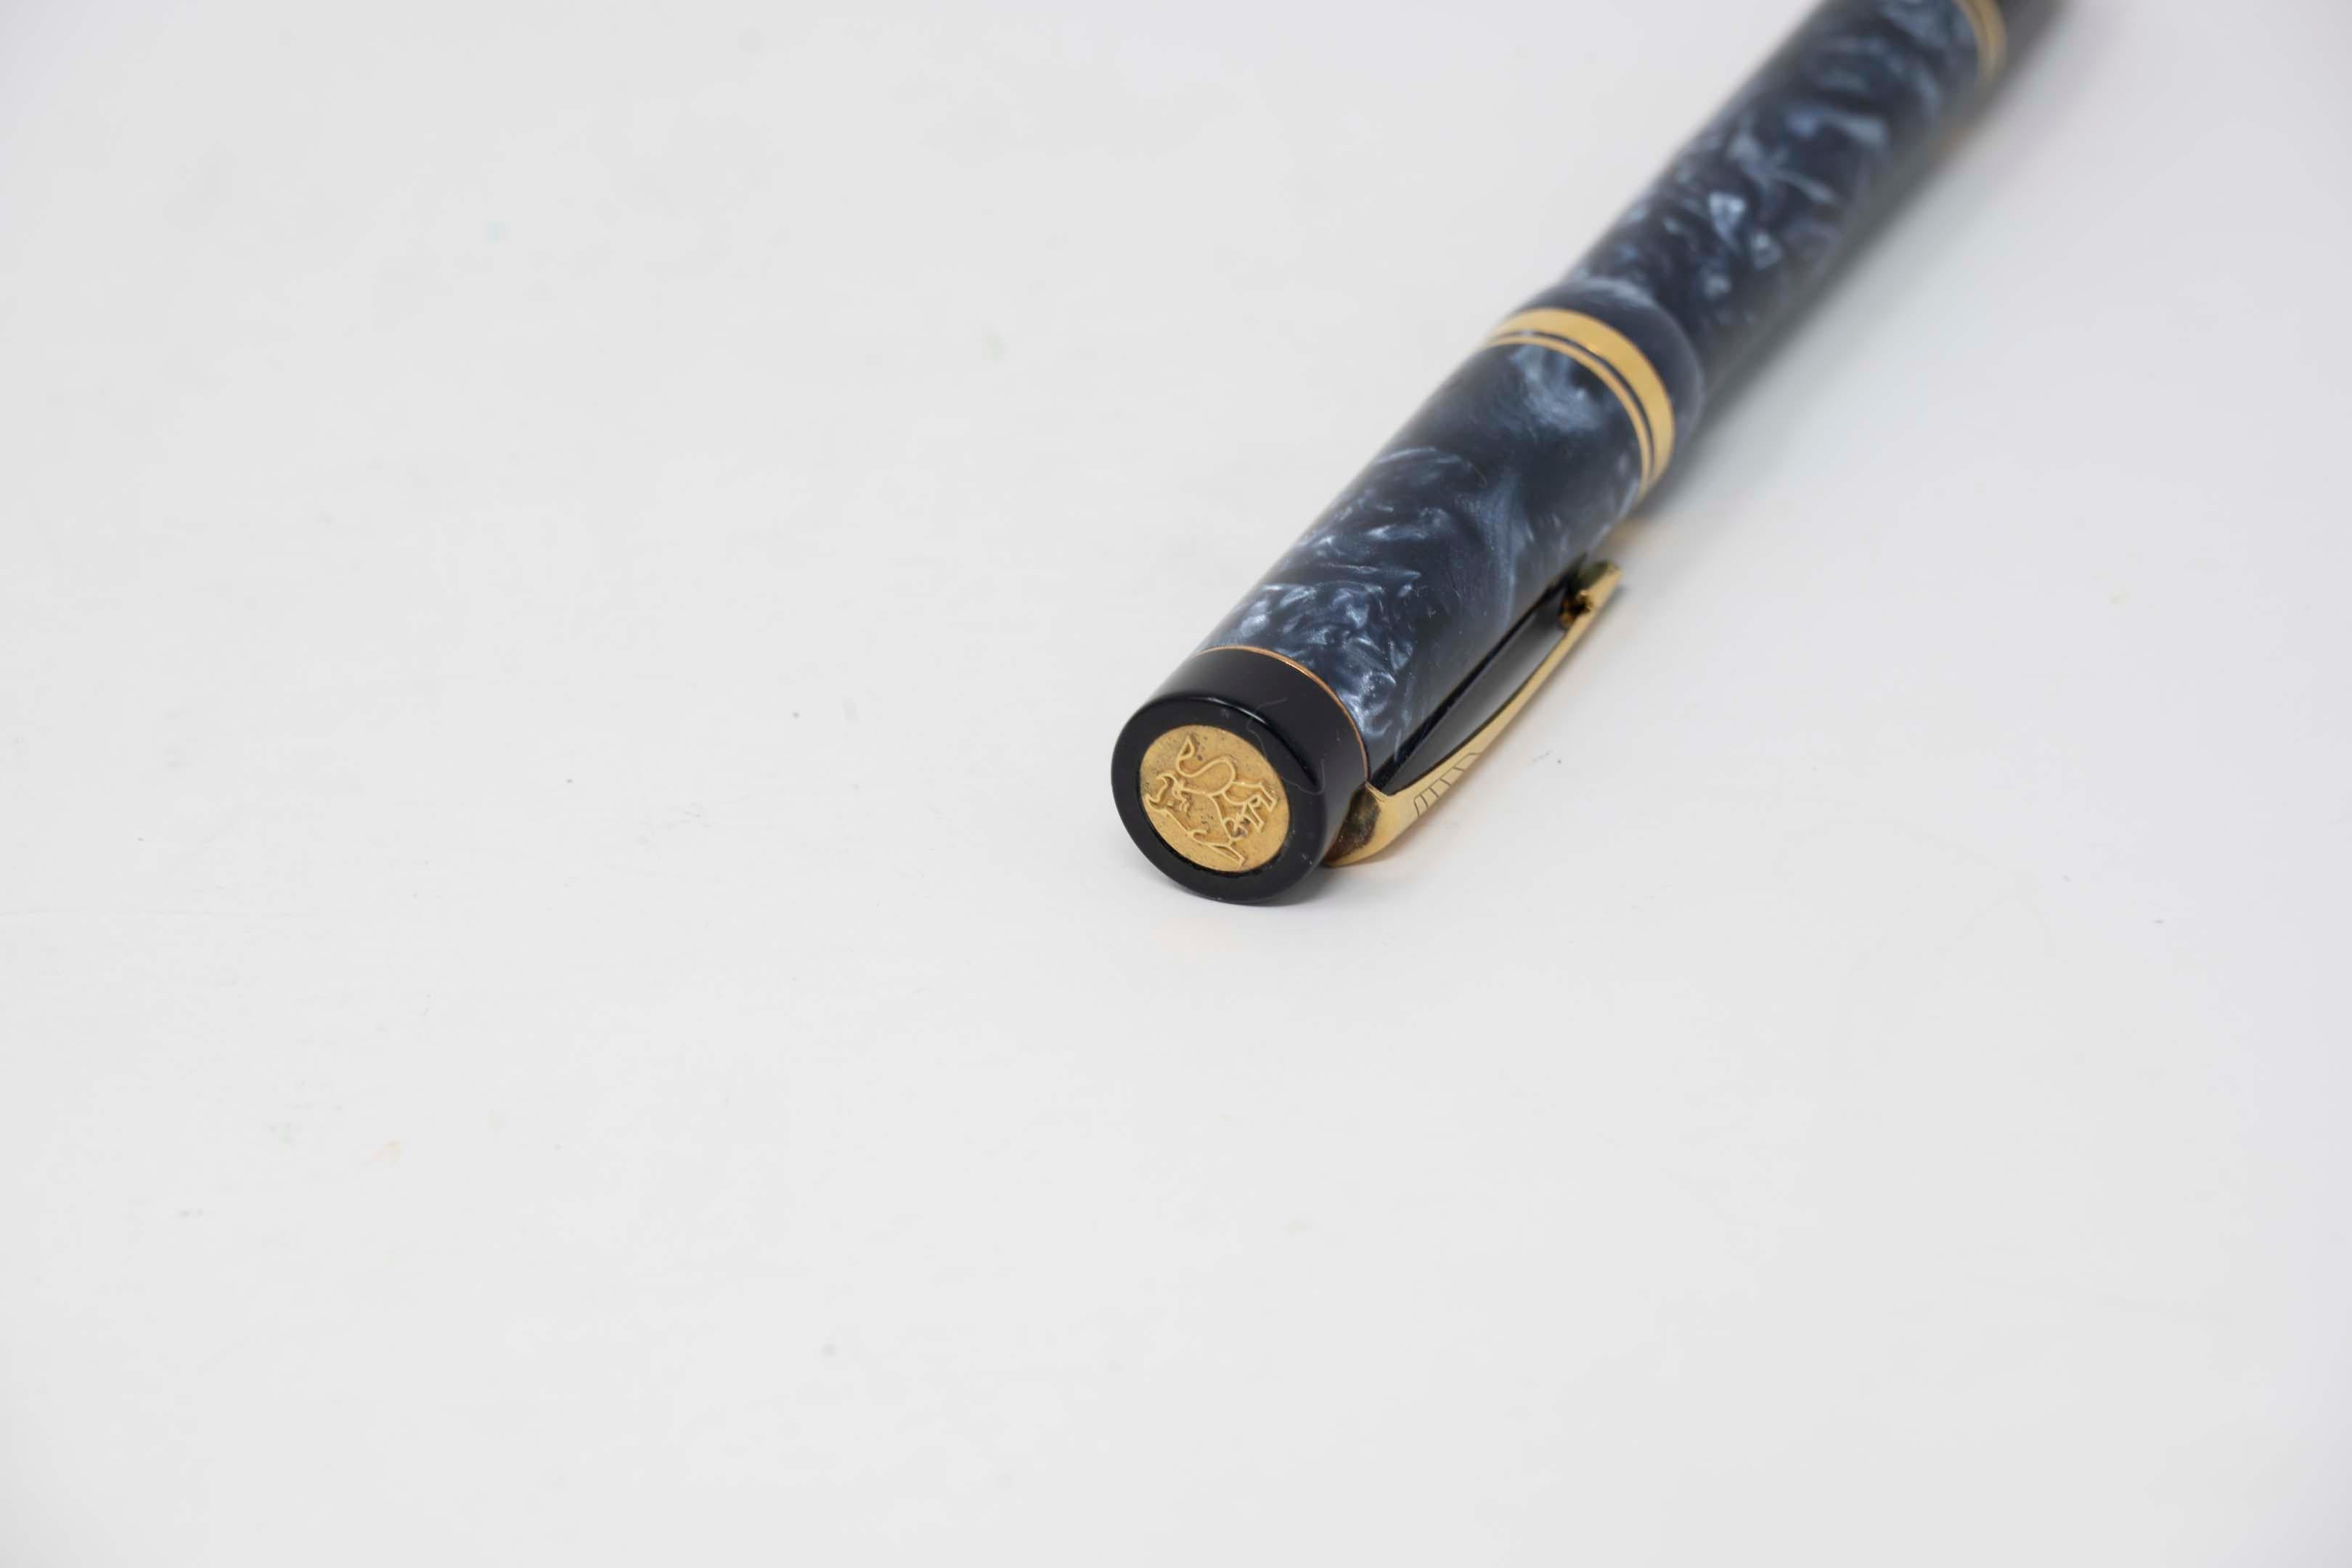 Parker Duofold marbled blue fountain pen with 18k gold nib, 13.5 cm long. Maker Parker, made in UK. Cap shows the gold bull design, in good condition refill must be replaced.
